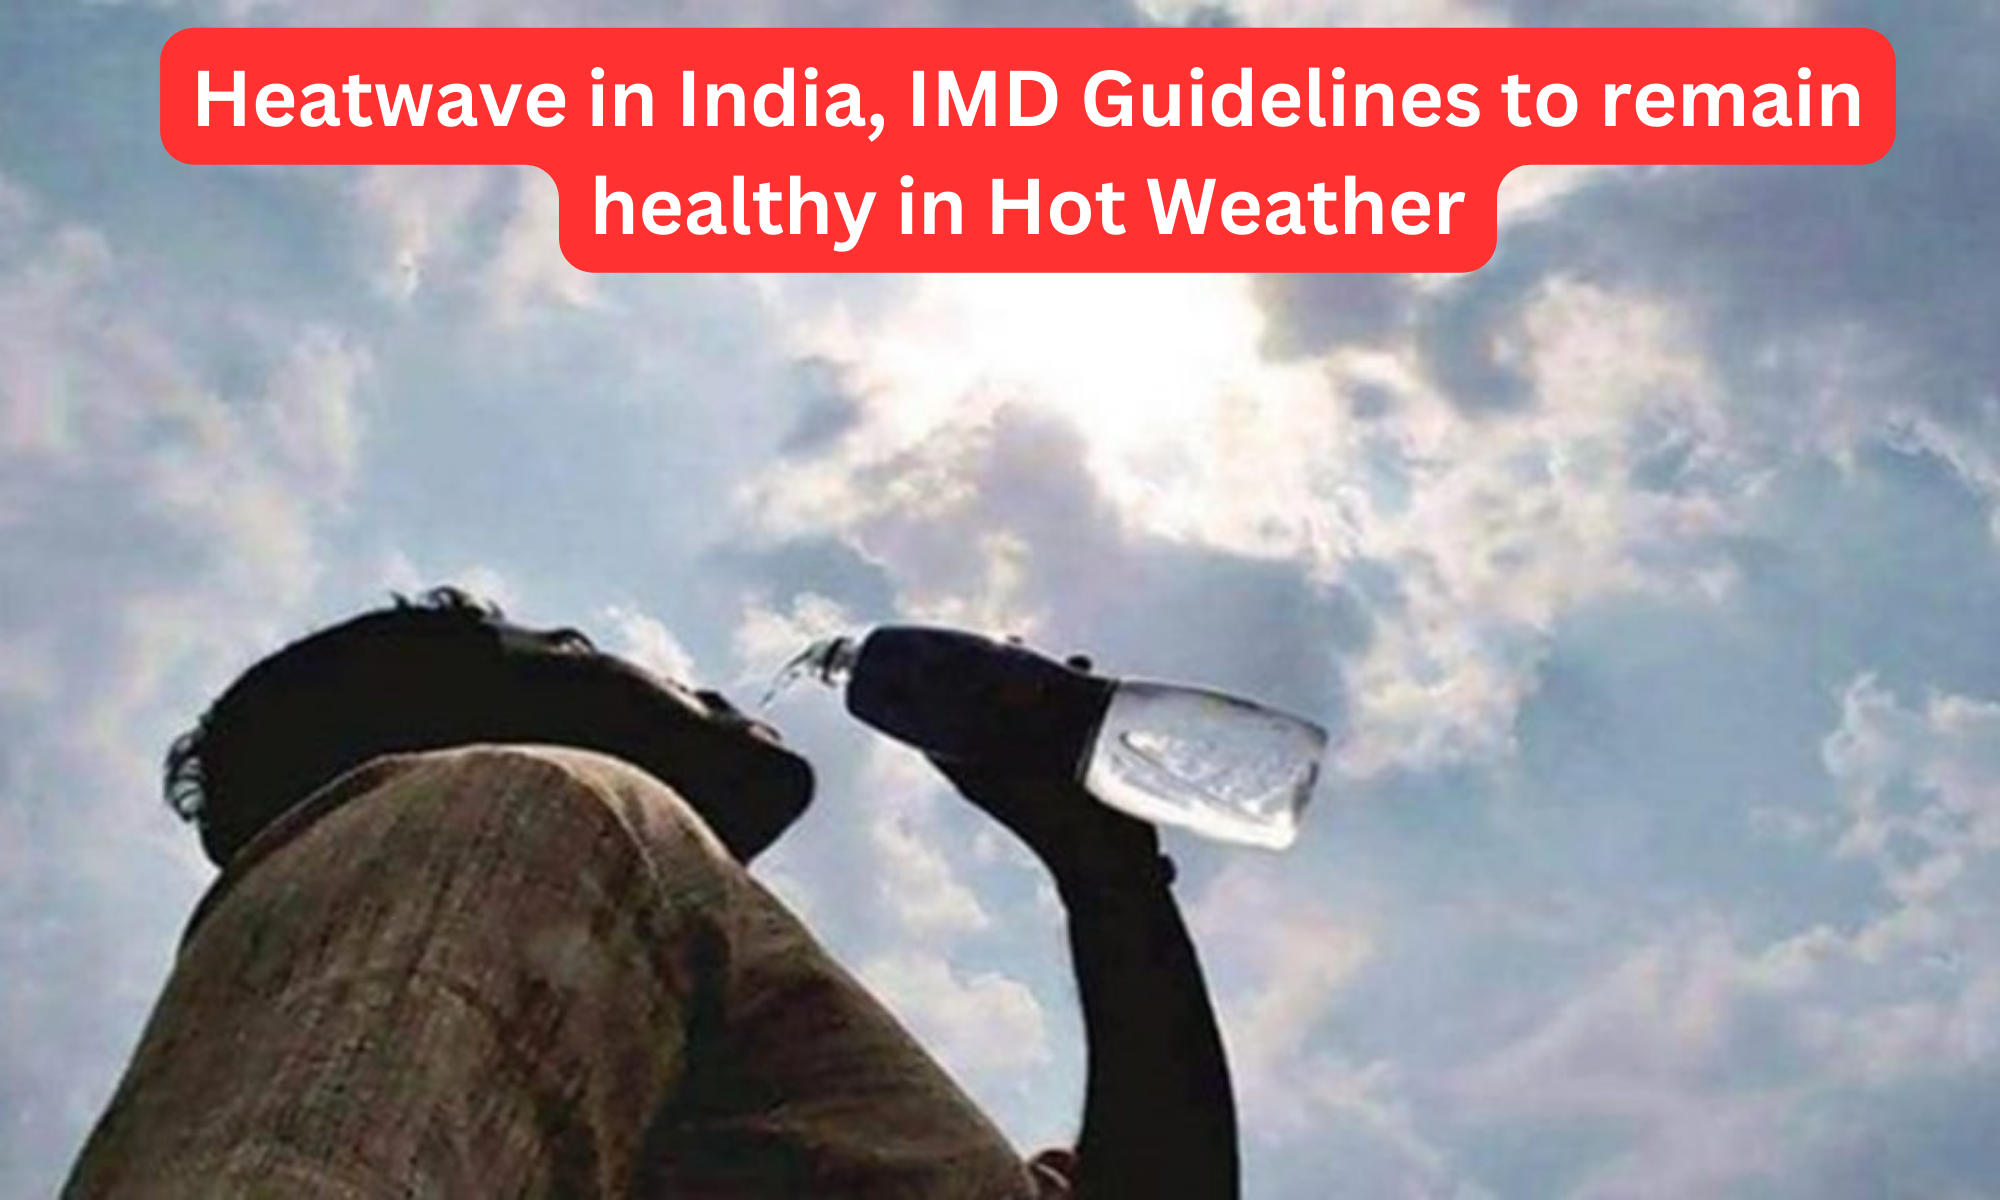 Heatwave in India, IMD Guidelines to remain healthy in Hot Weather